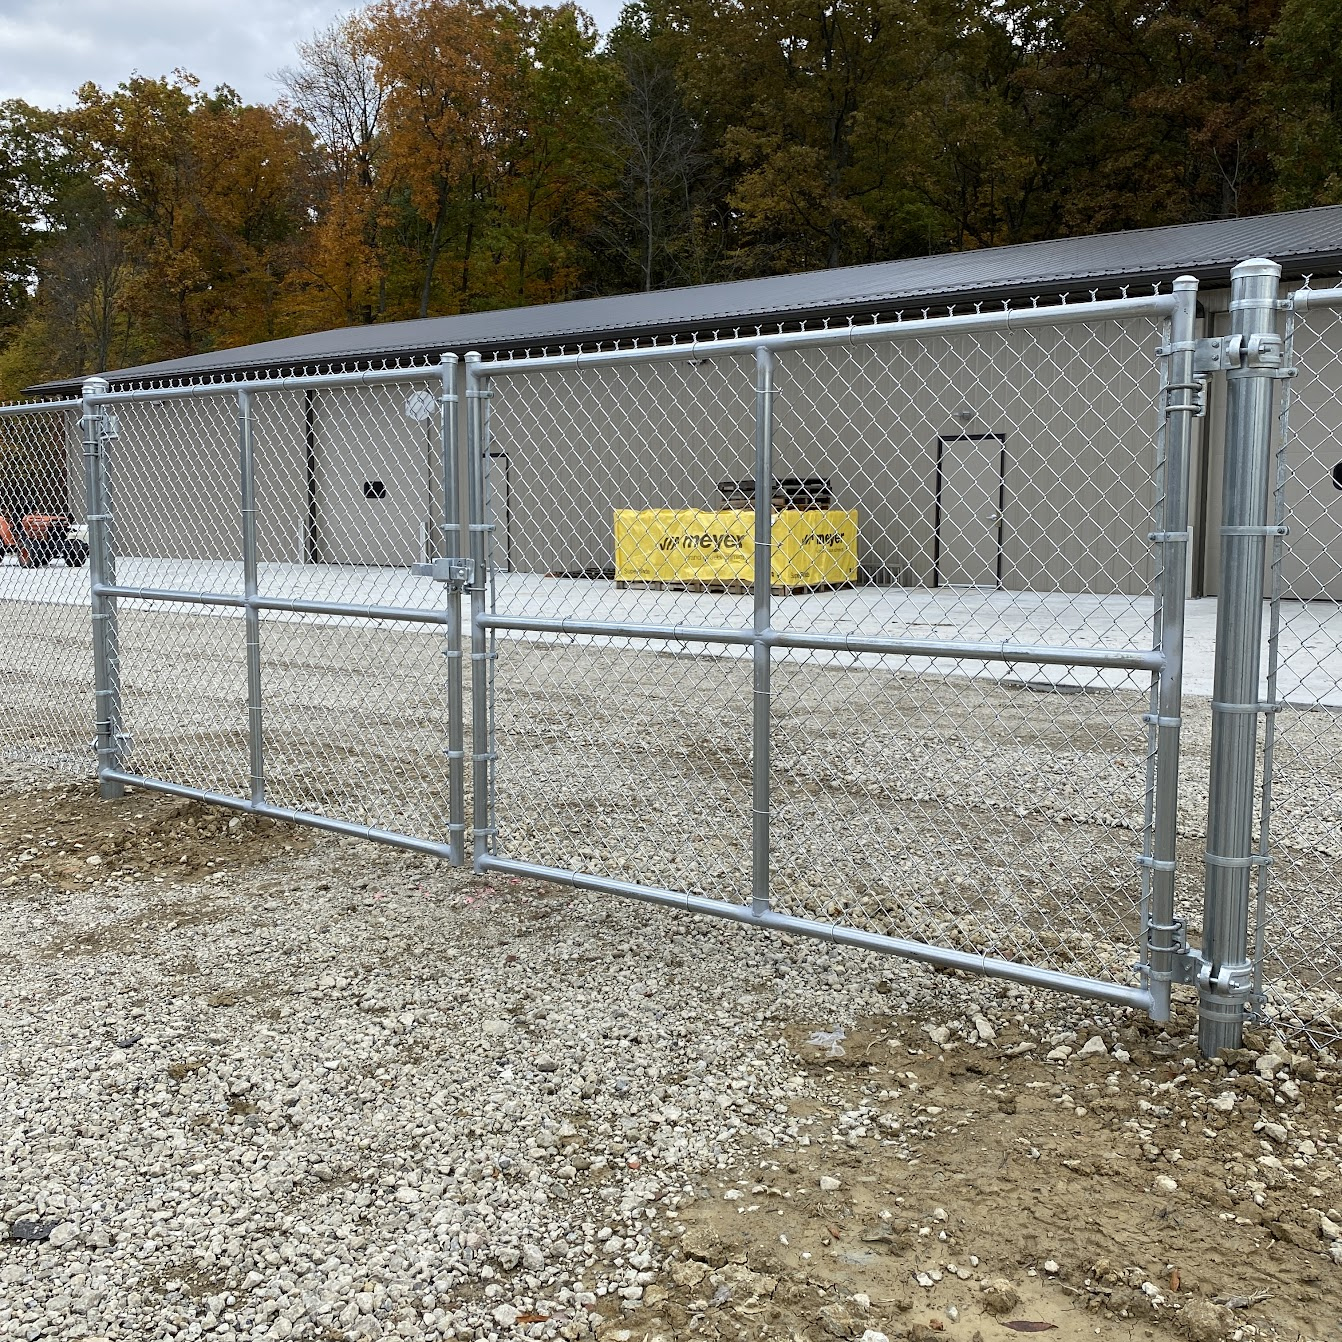 Hoover Fence Commercial Chain Link Fence Double Gates, All 1-5/8"  Galvanized HF20 Frame Hoover Fence Co.